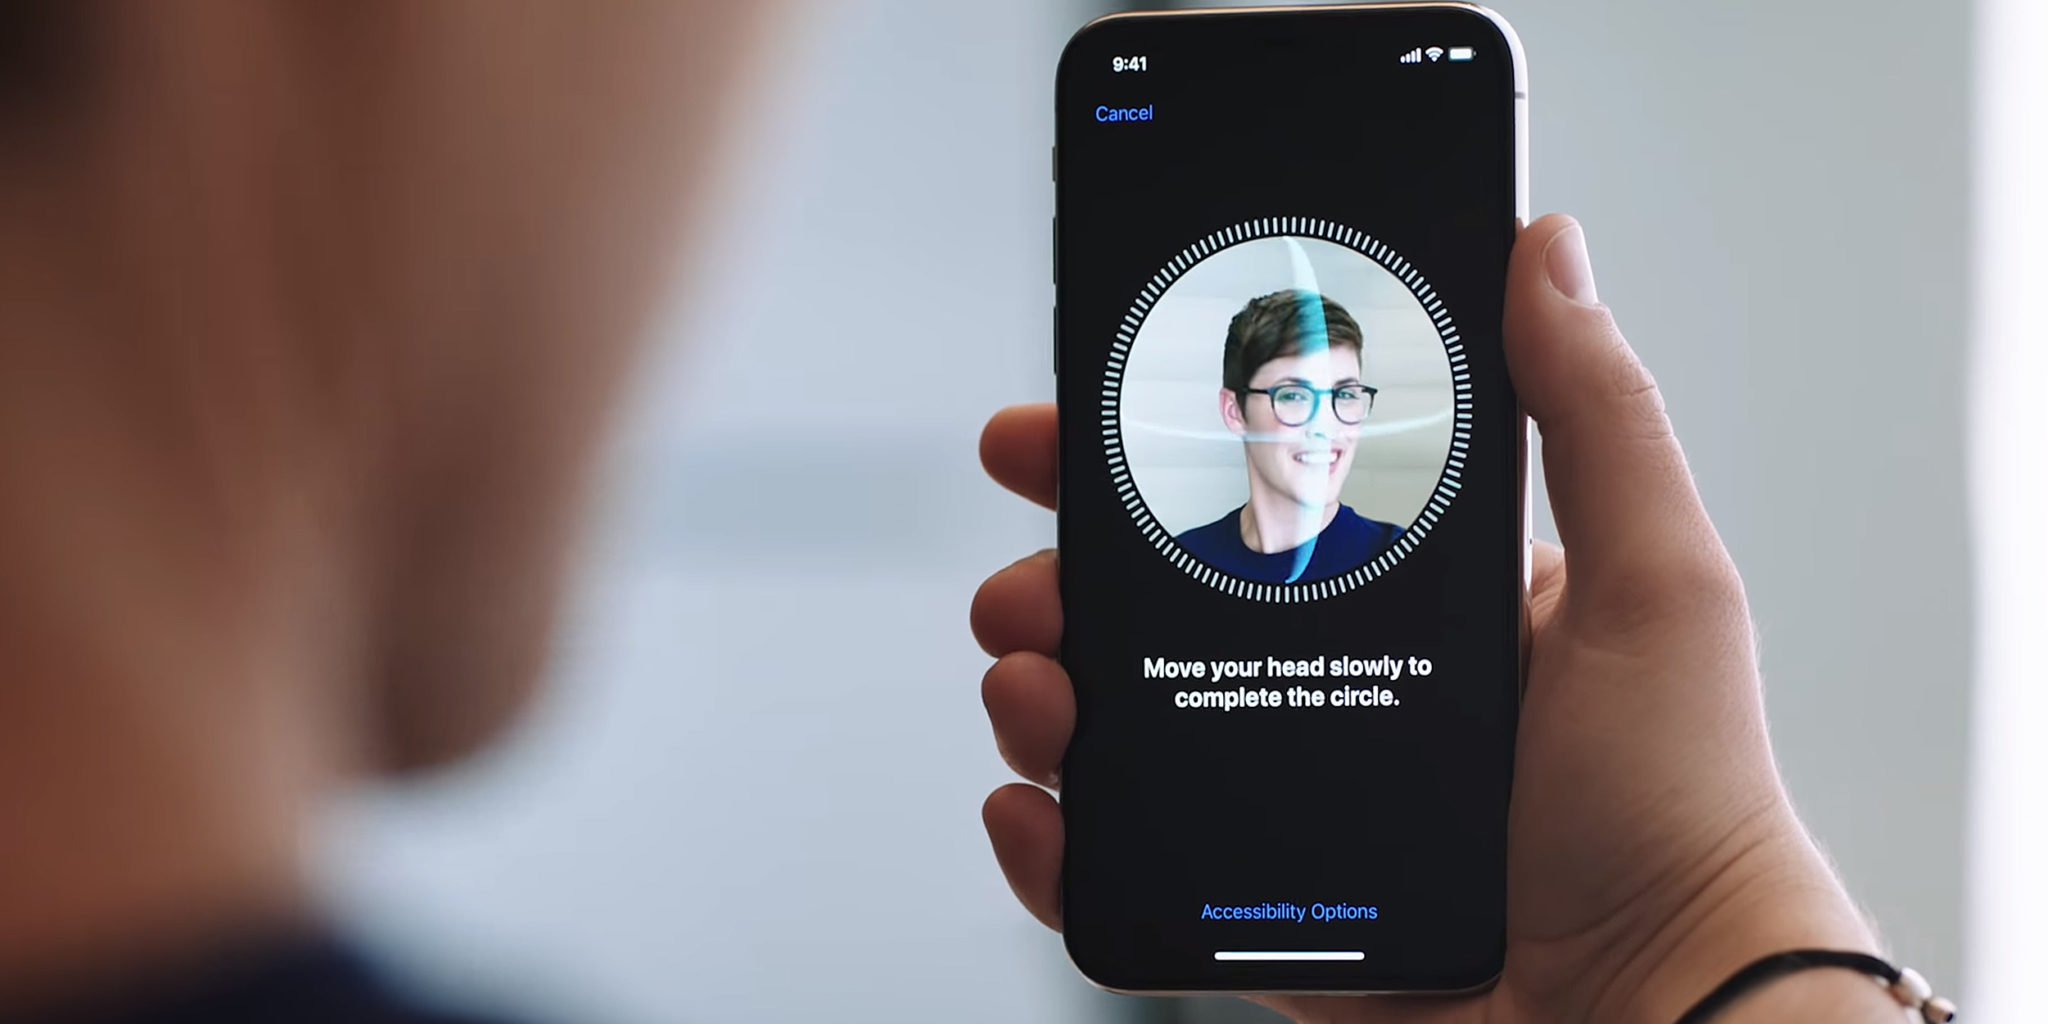 Apple bought Lighthouse patents of FaceID technology